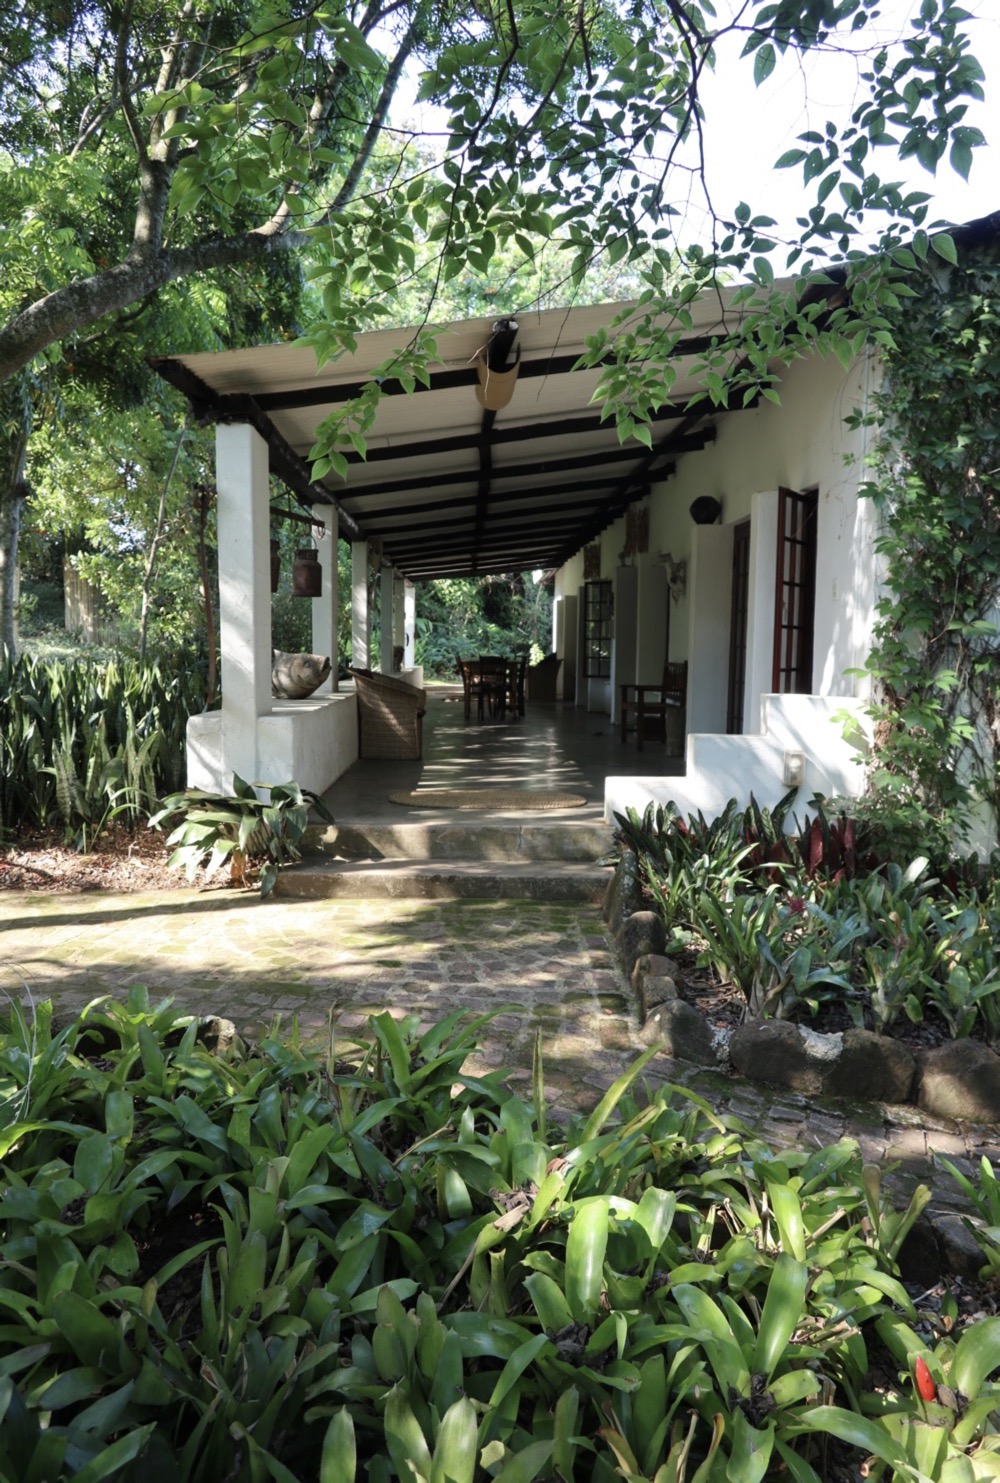 Accommodation is available at The Artists' Press Guesthouse which is a converted farmhouse set in a beautiful sprawling sub-tropical African garden.